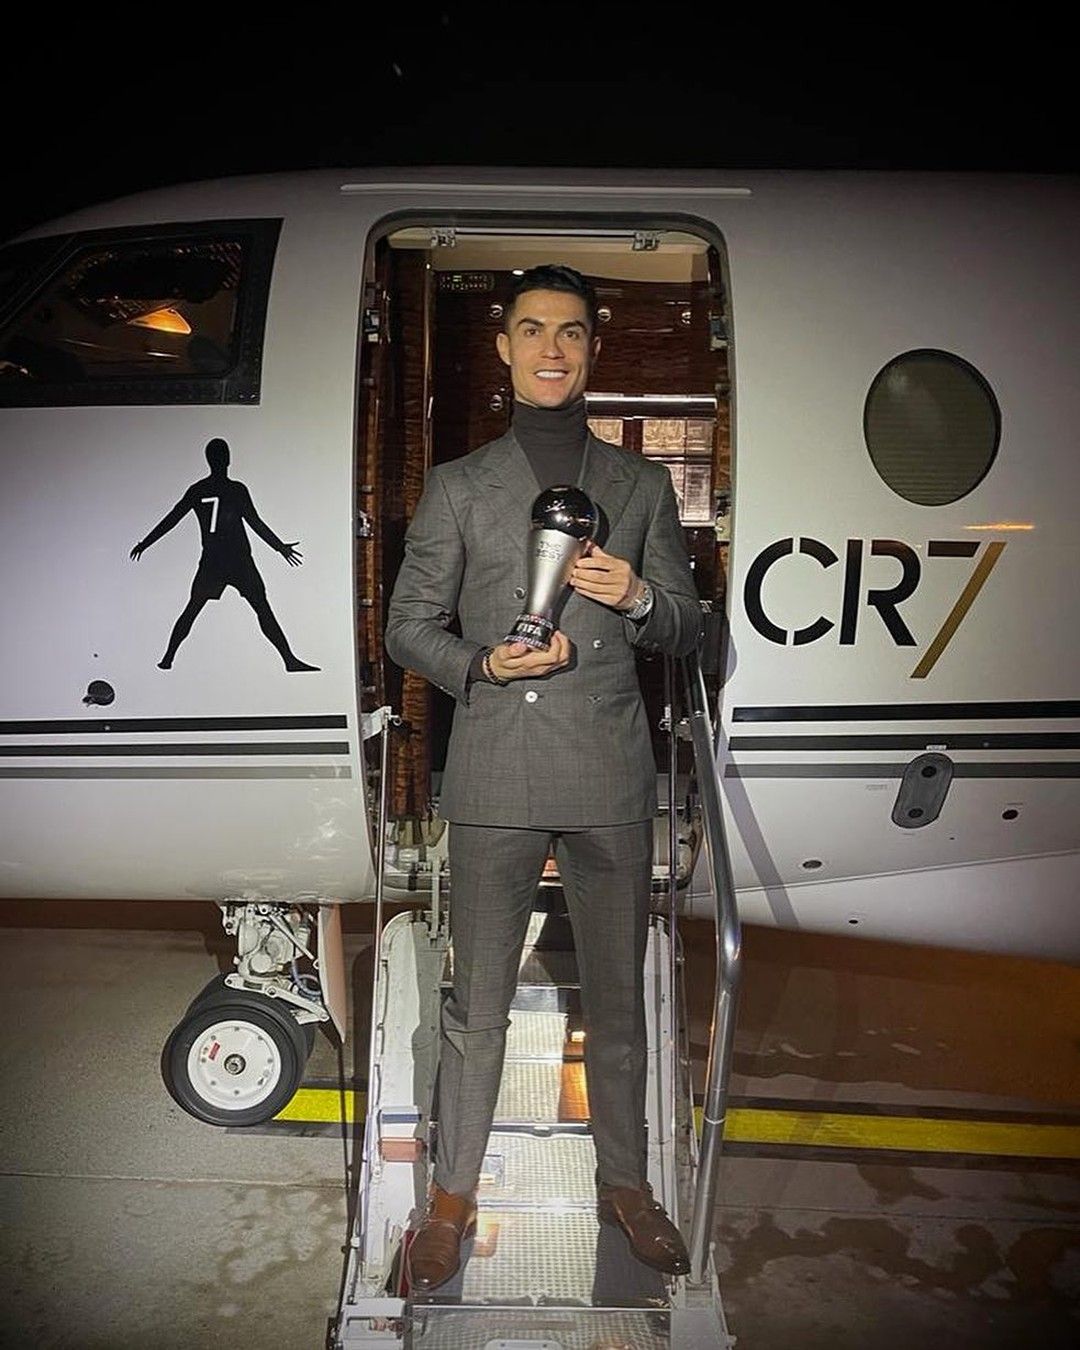 Top 10 Expensive Items owned by Cristiano Ronaldo - CR7 the richest  Footballer in the world.